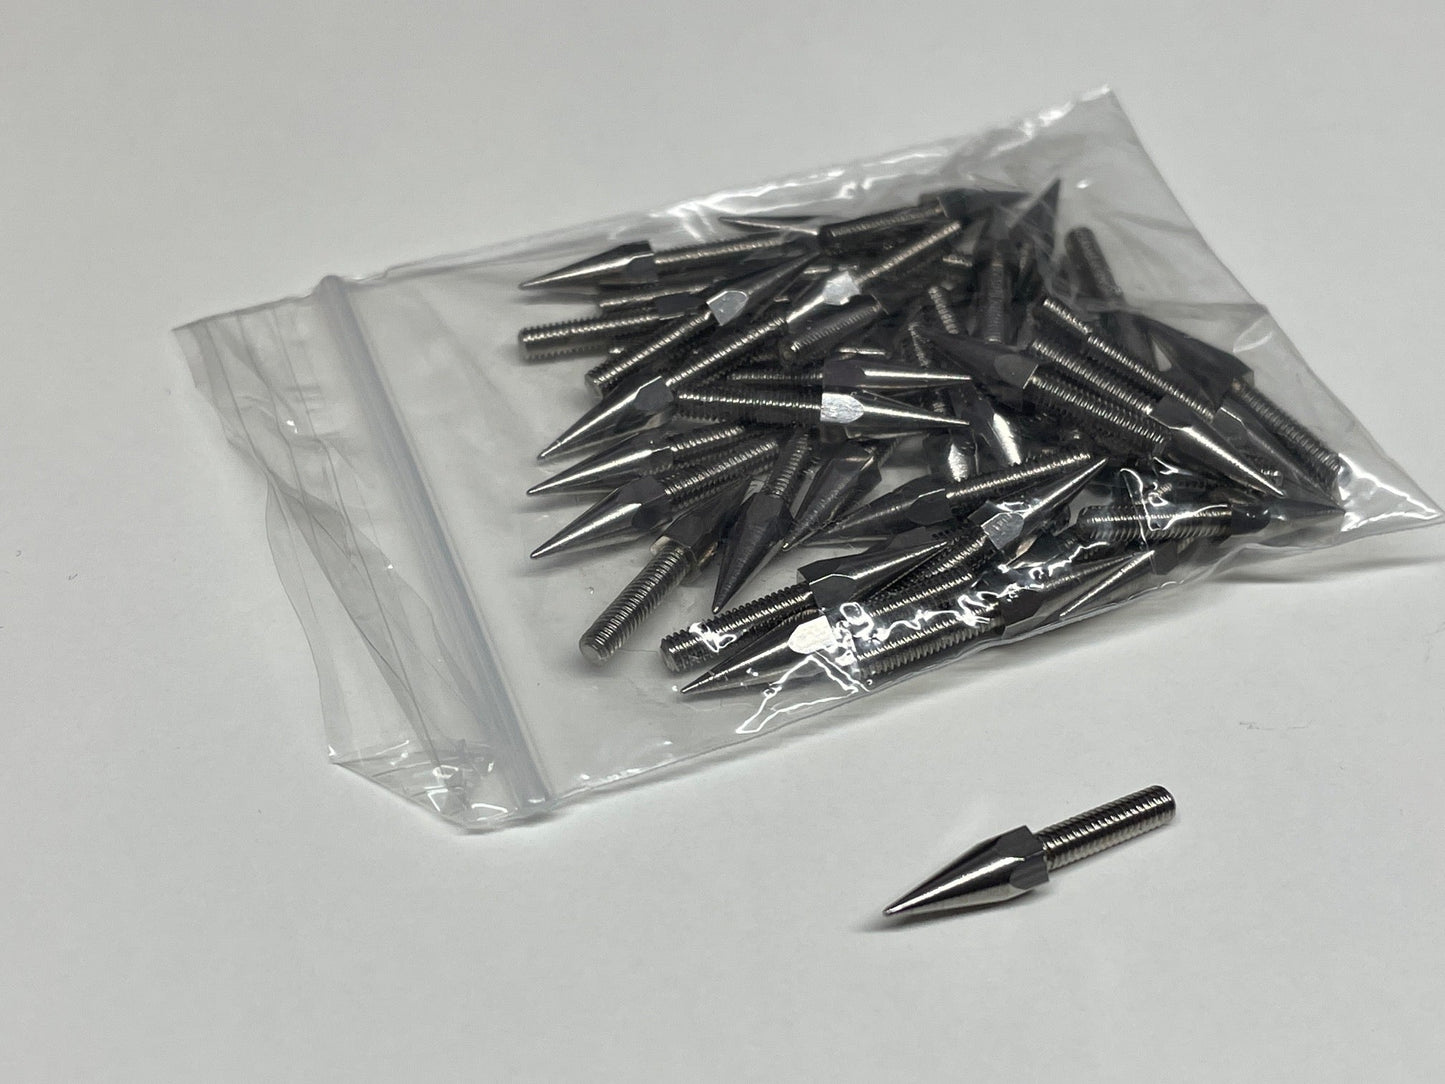 Stainless Steel Silver Spiked Lugs m2.5 x 14mm 41 Count with Install Tool for the Redcat 53 COE or CEN F450 Hauler